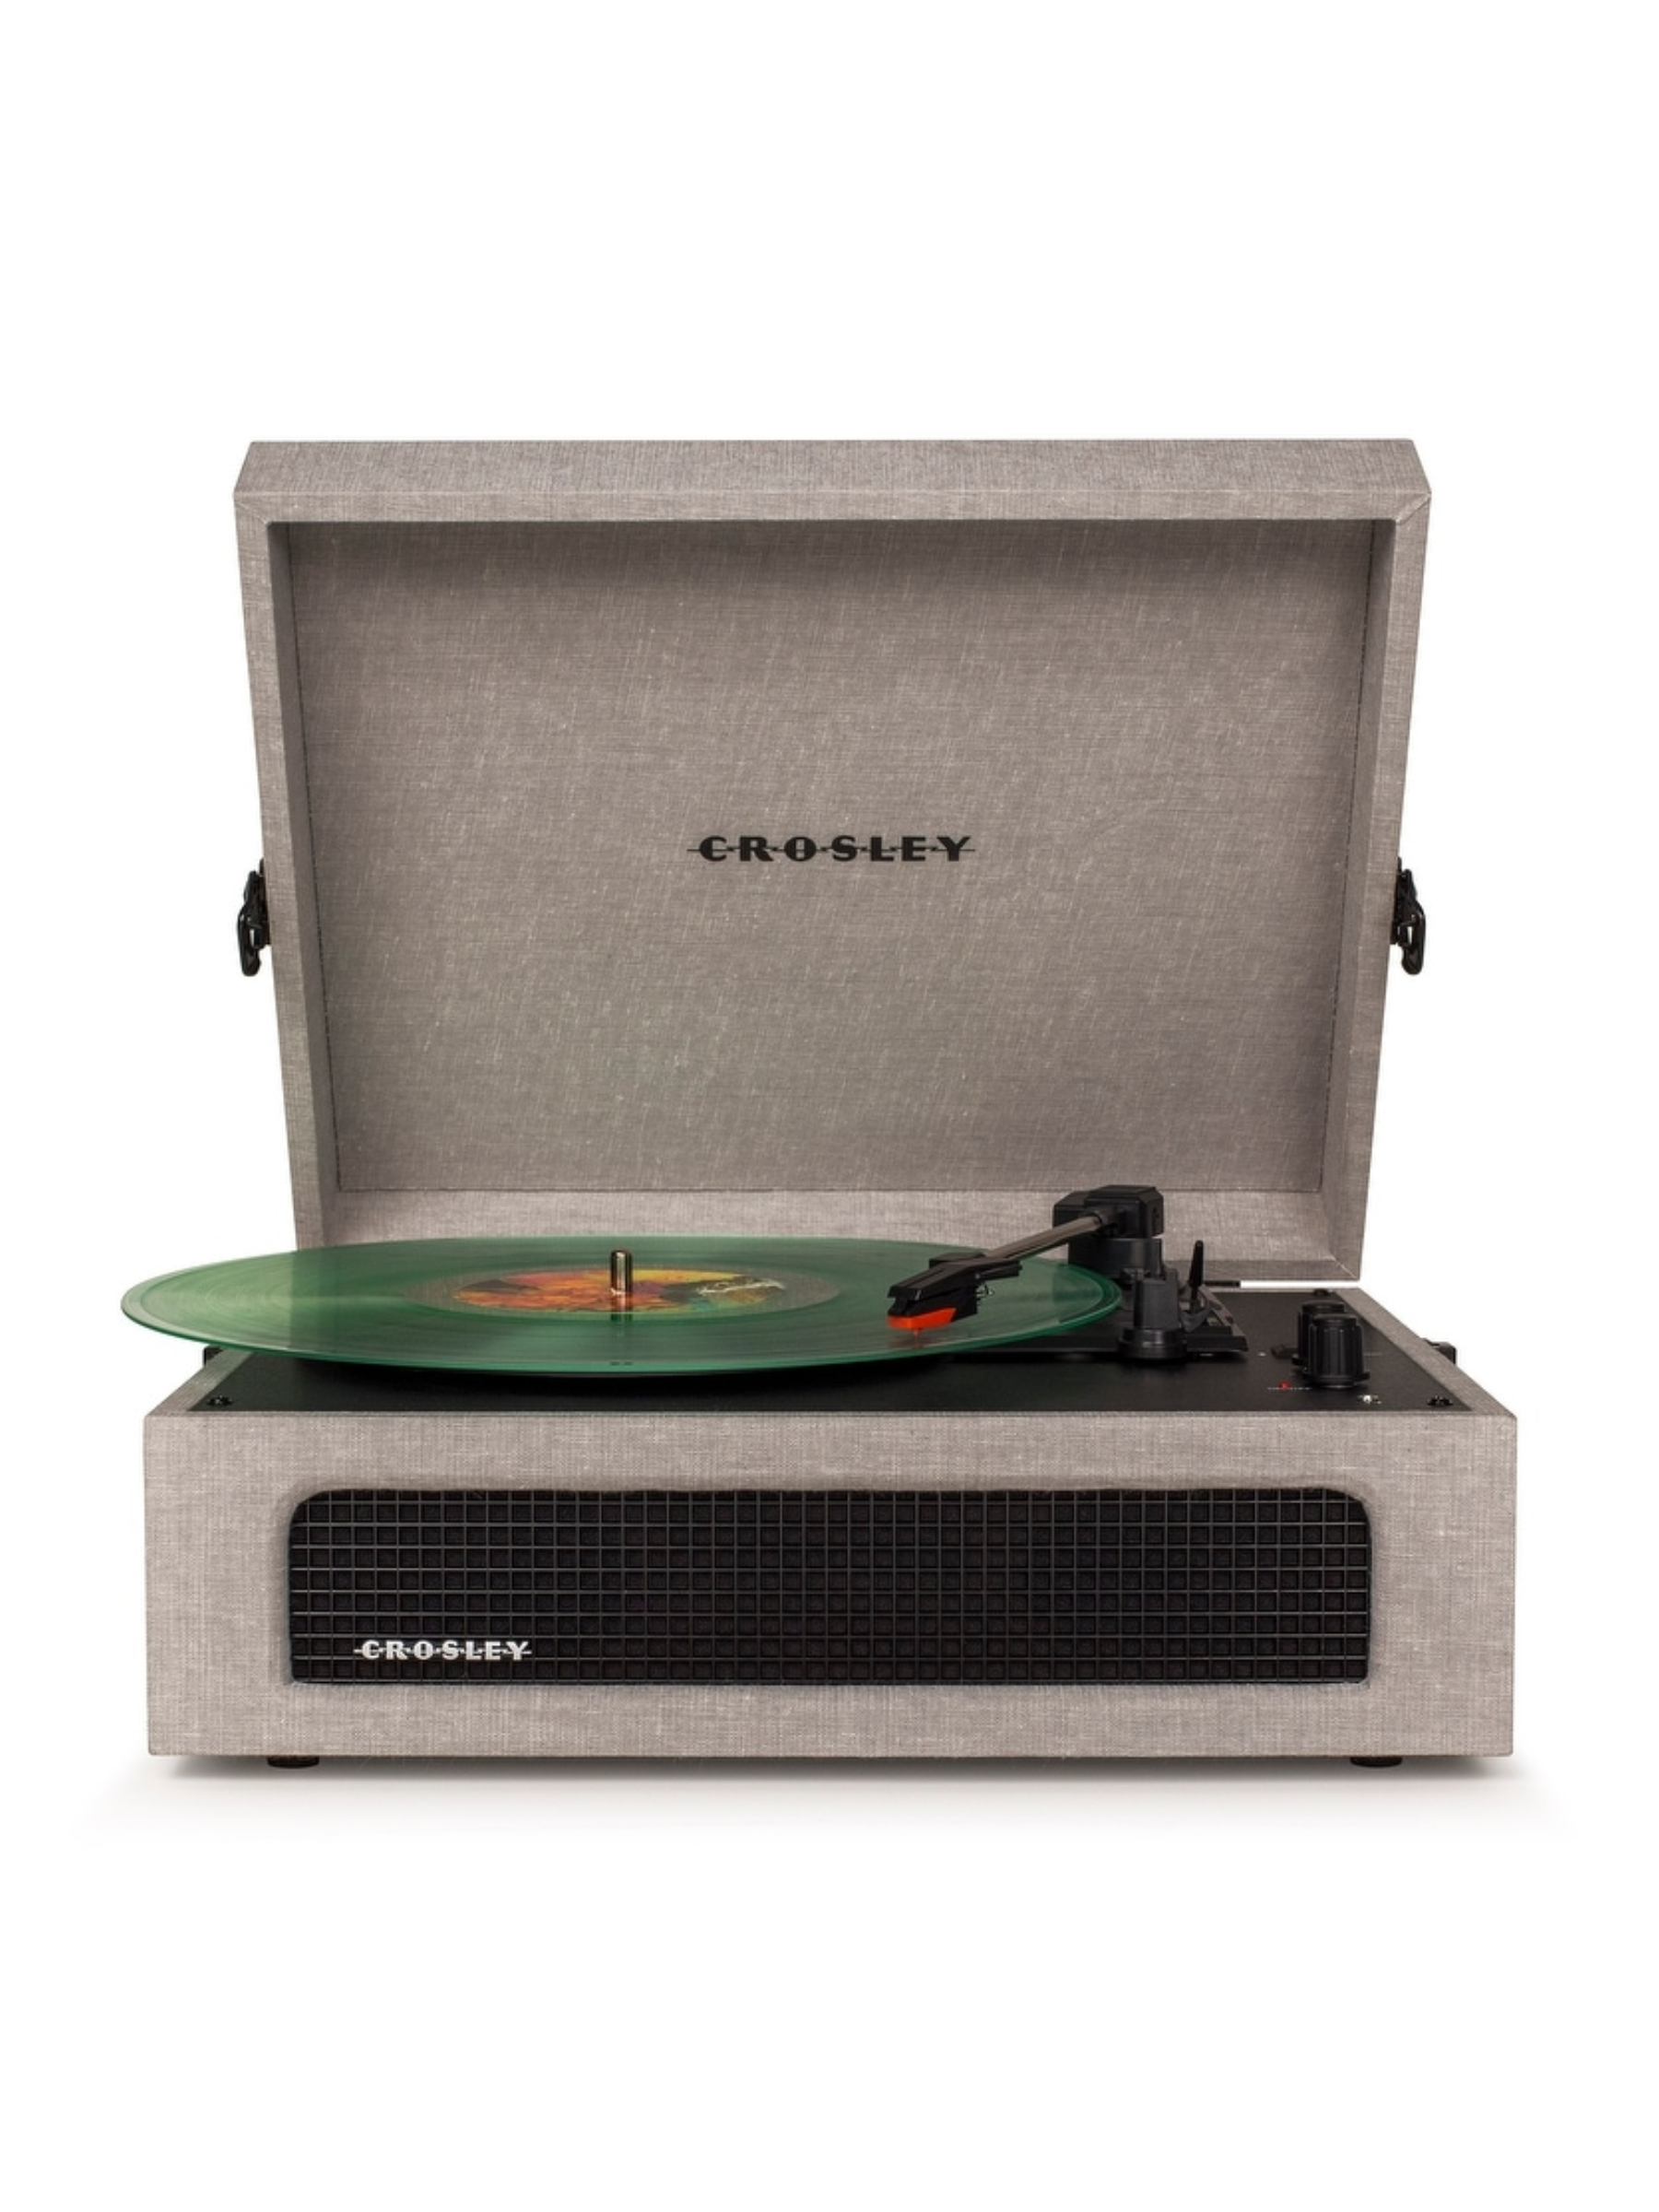 Music streaming services are cool, but loop your teen into the nostalgia of vinyl. Plenty of their favorite artists, from Taylor Swift to Harry Styles, have vinyl versions of their most beloved albums. $90, Nordstrom. <a href="https://www.nordstrom.com/s/voyager-turntable/5279015?">Get it now!</a><p>Sign up for today’s biggest stories, from pop culture to politics.</p><a href="https://www.glamour.com/newsletter/news?sourceCode=msnsend">Sign Up</a>